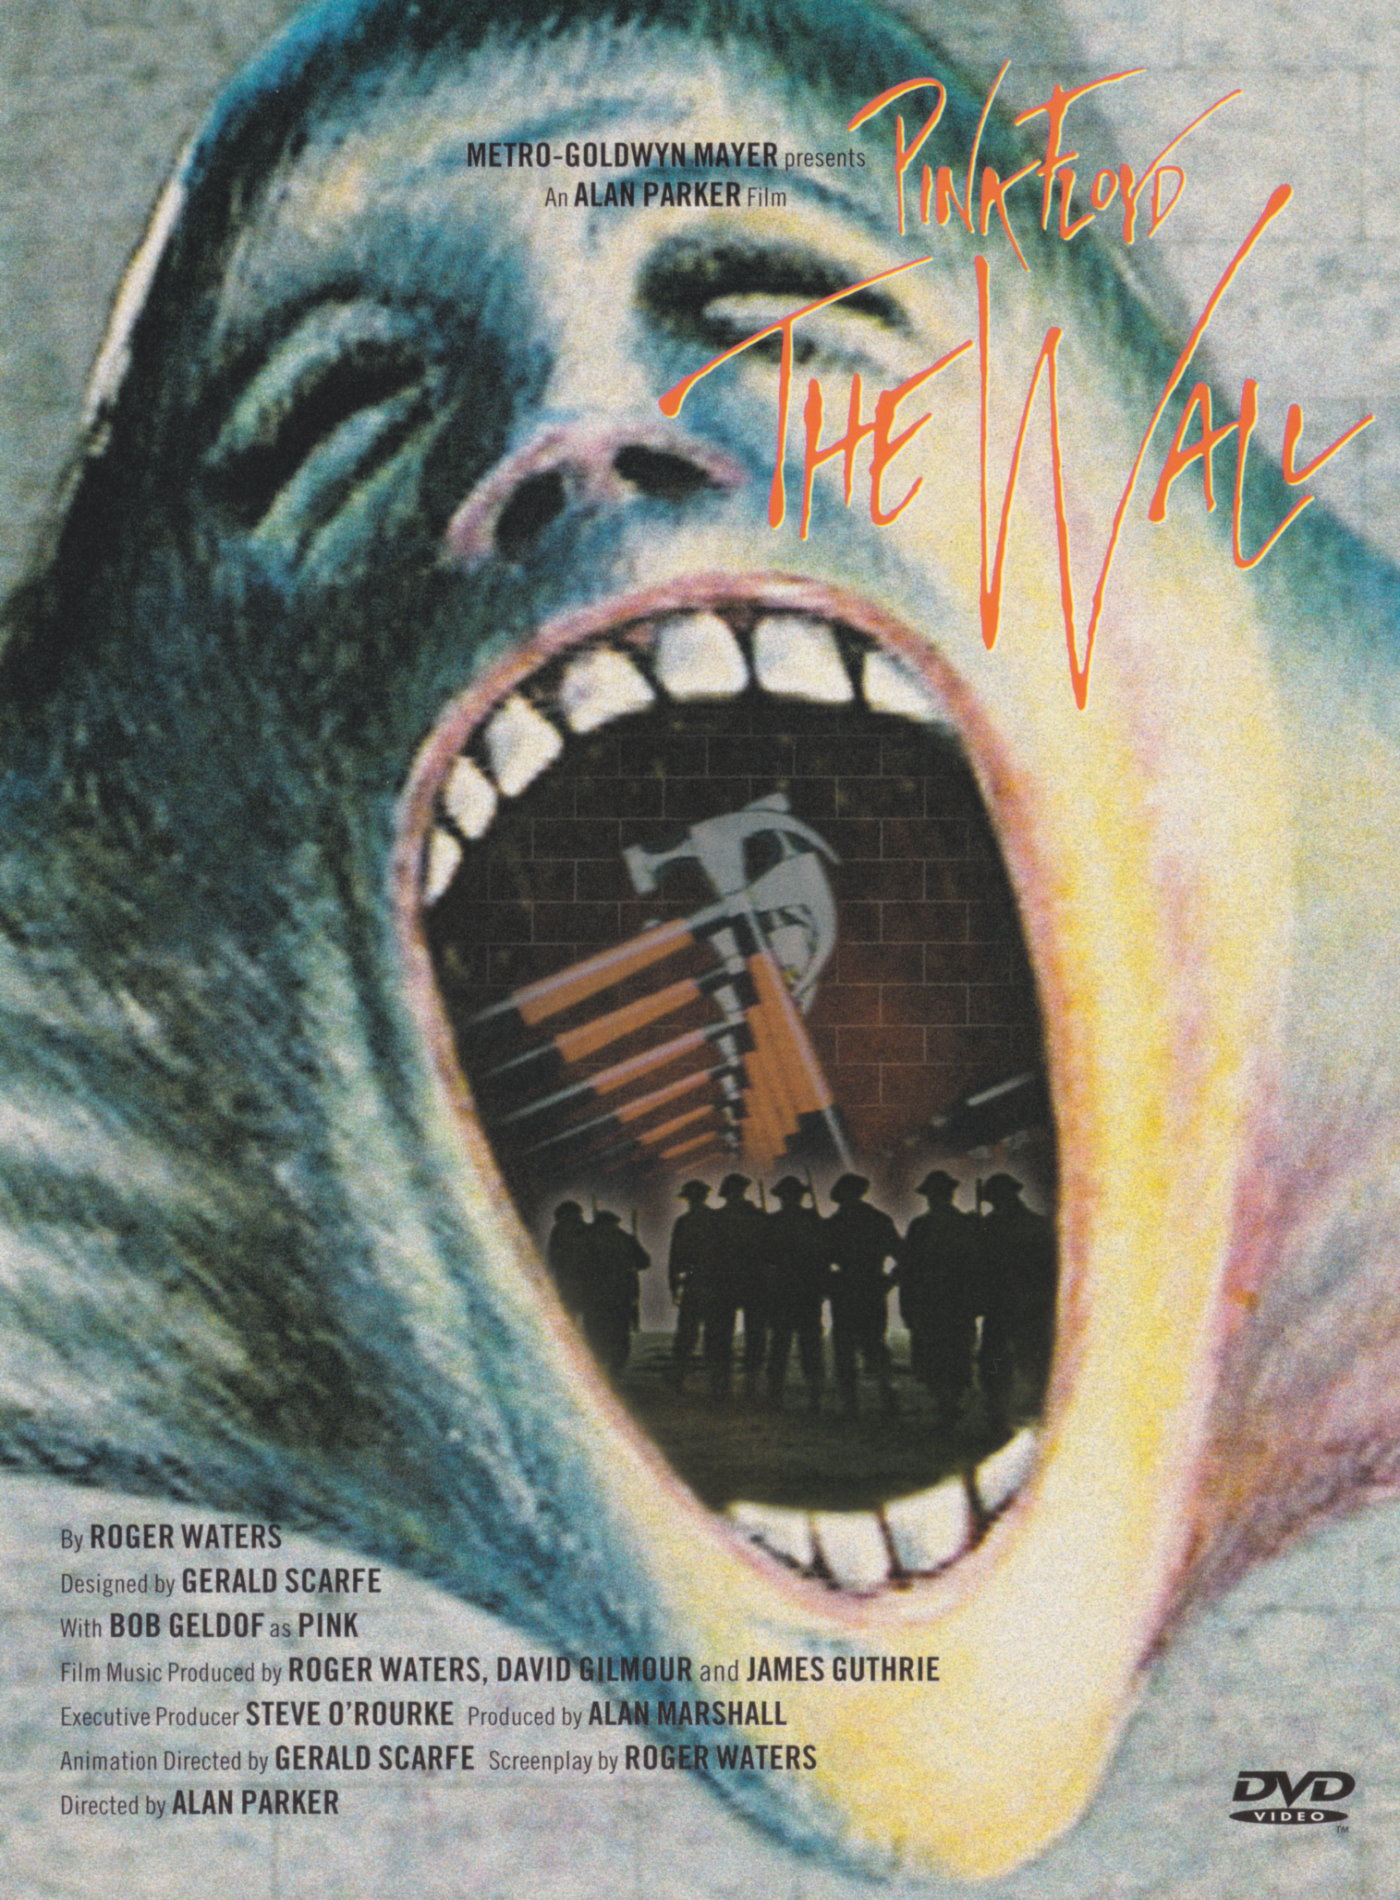 Cover - Pink Floyd - The Wall.jpg